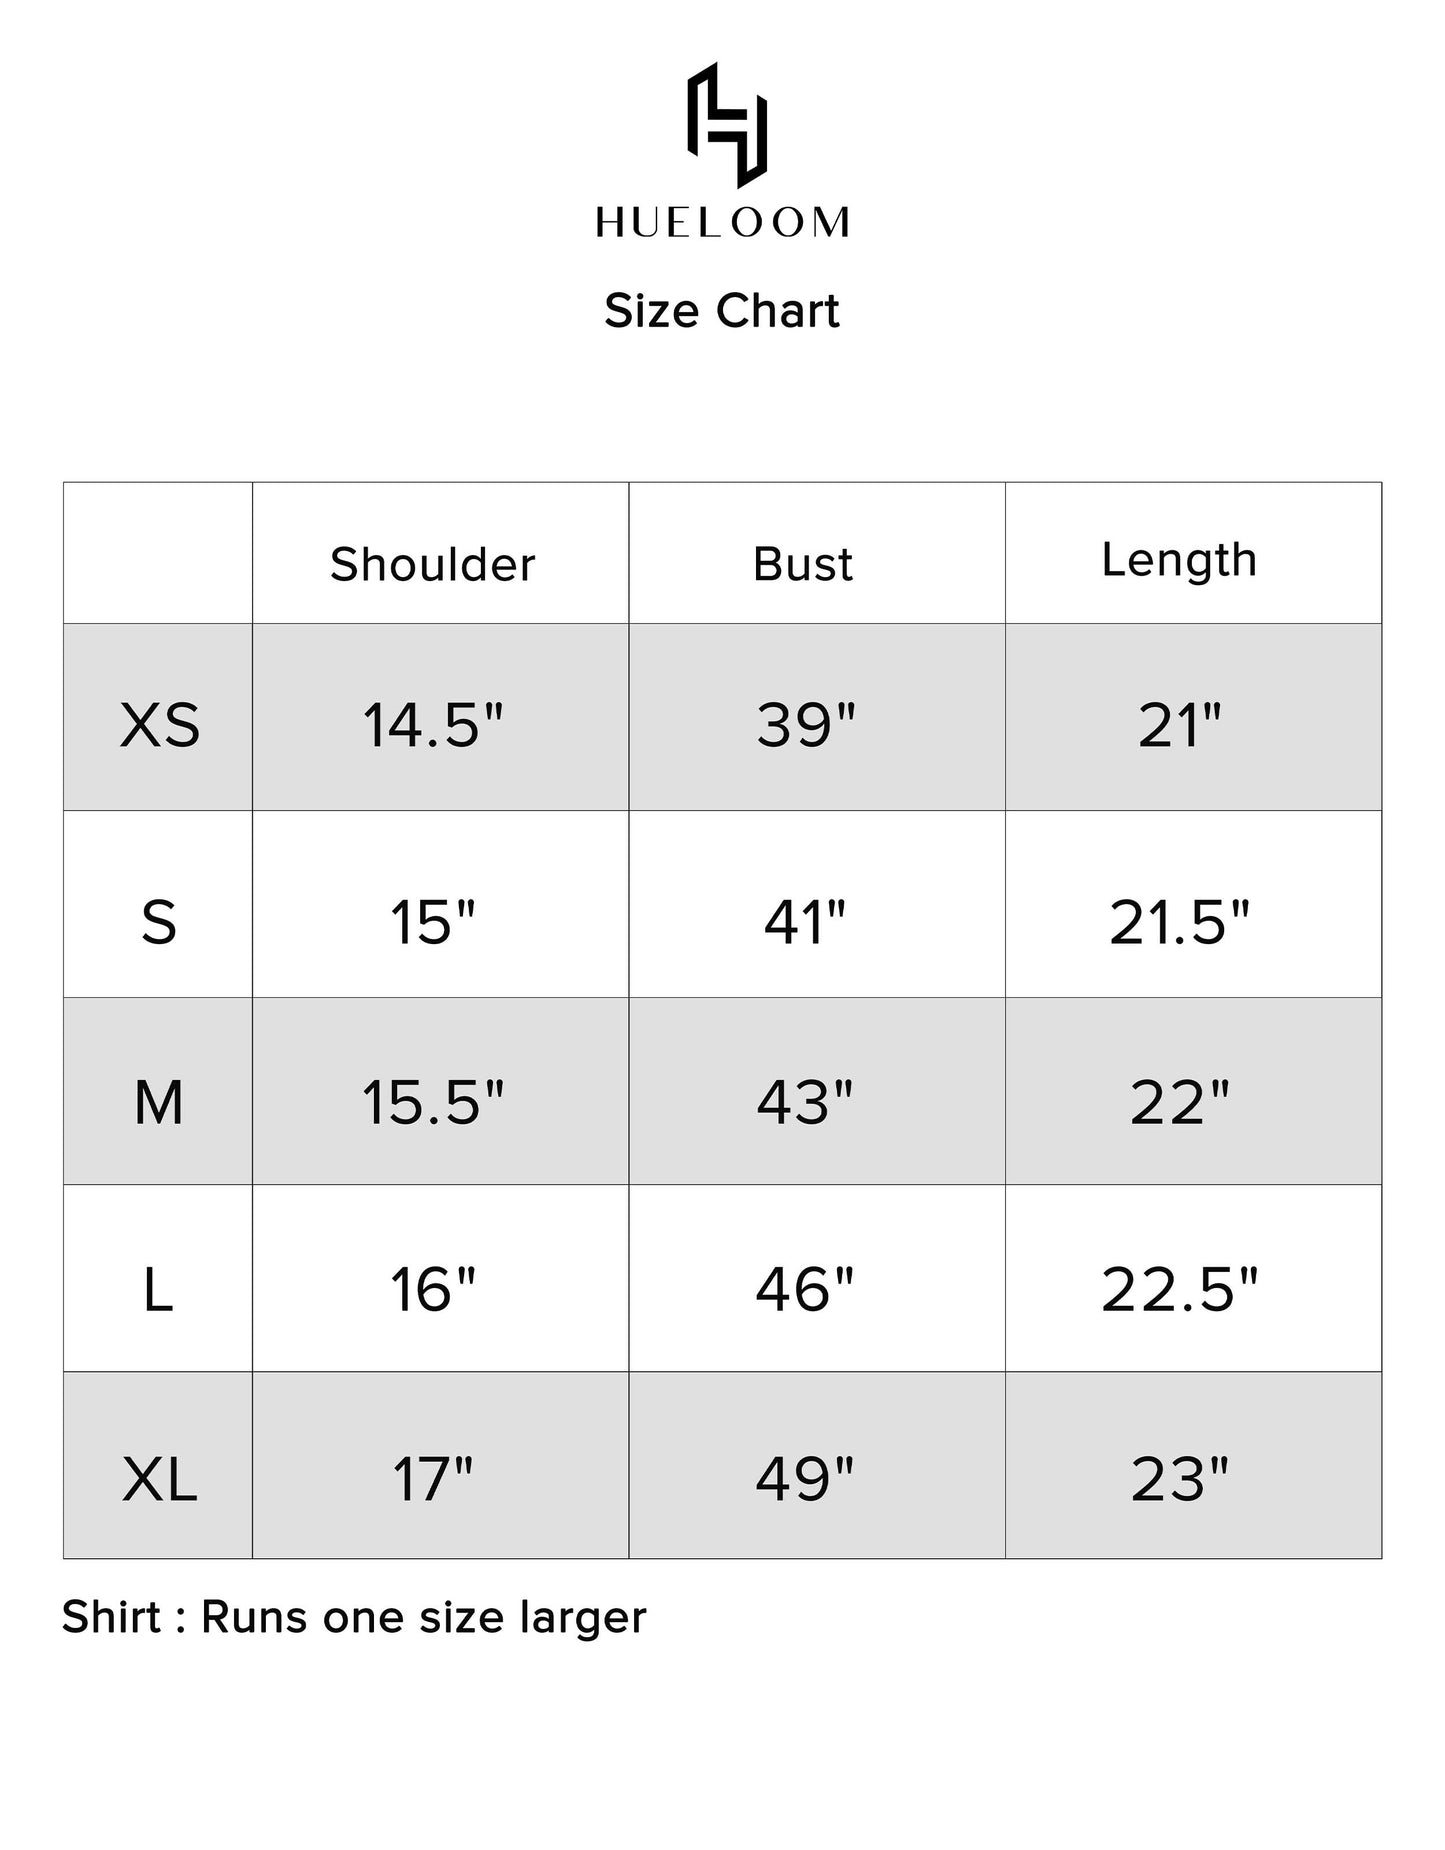 Hueloom Boxy shirt size chart display for accurate sizing.